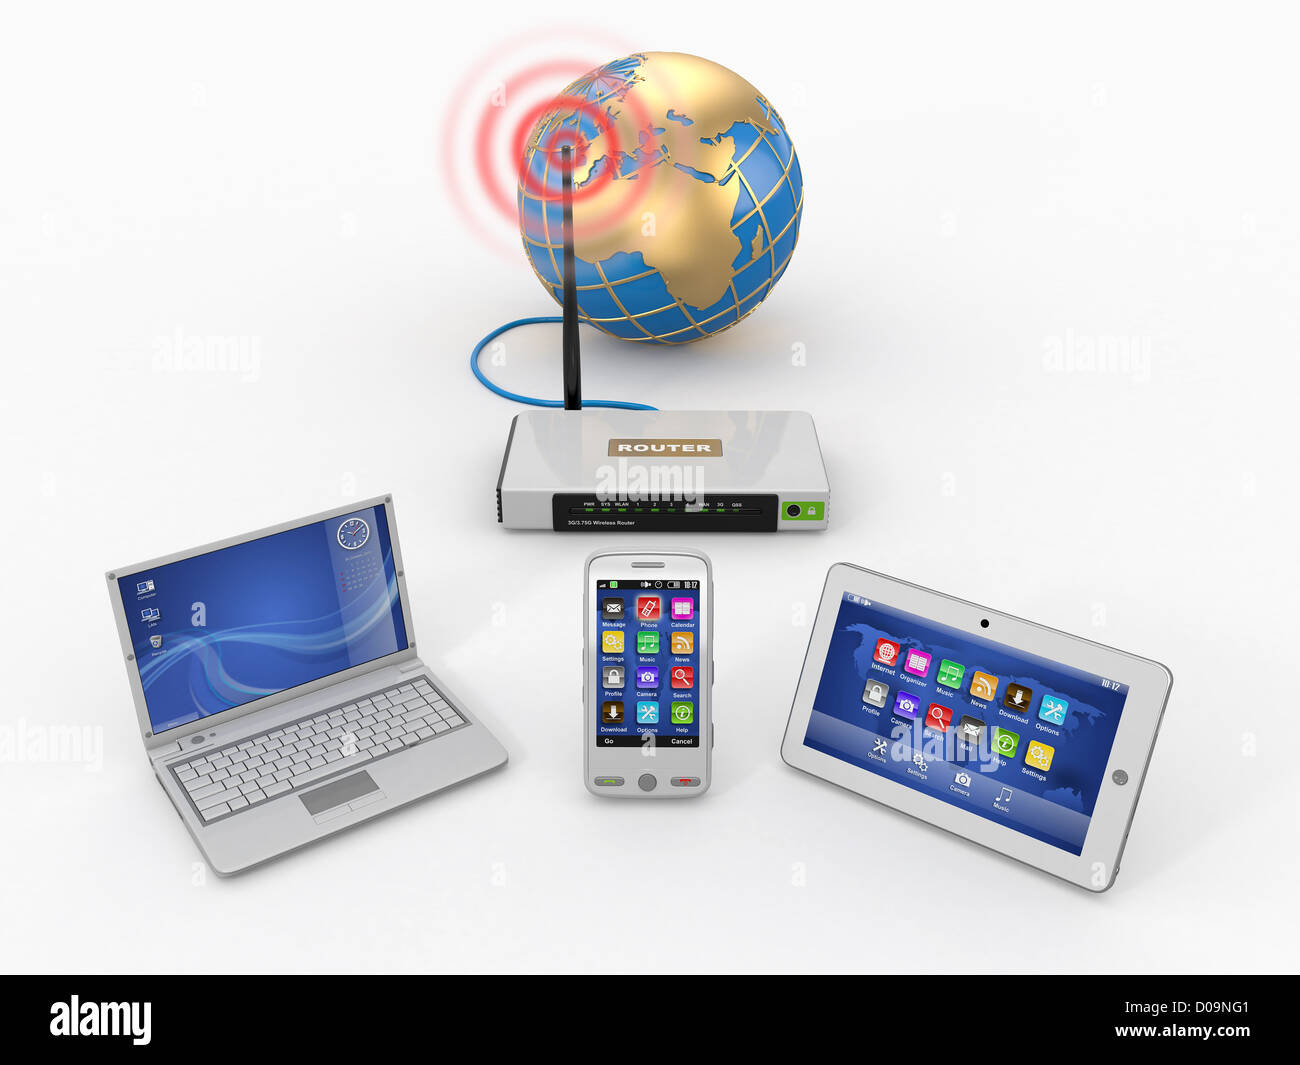 Home wifi network. Internet via router on phone, laptop and tablet pc. 3d Stock Photo